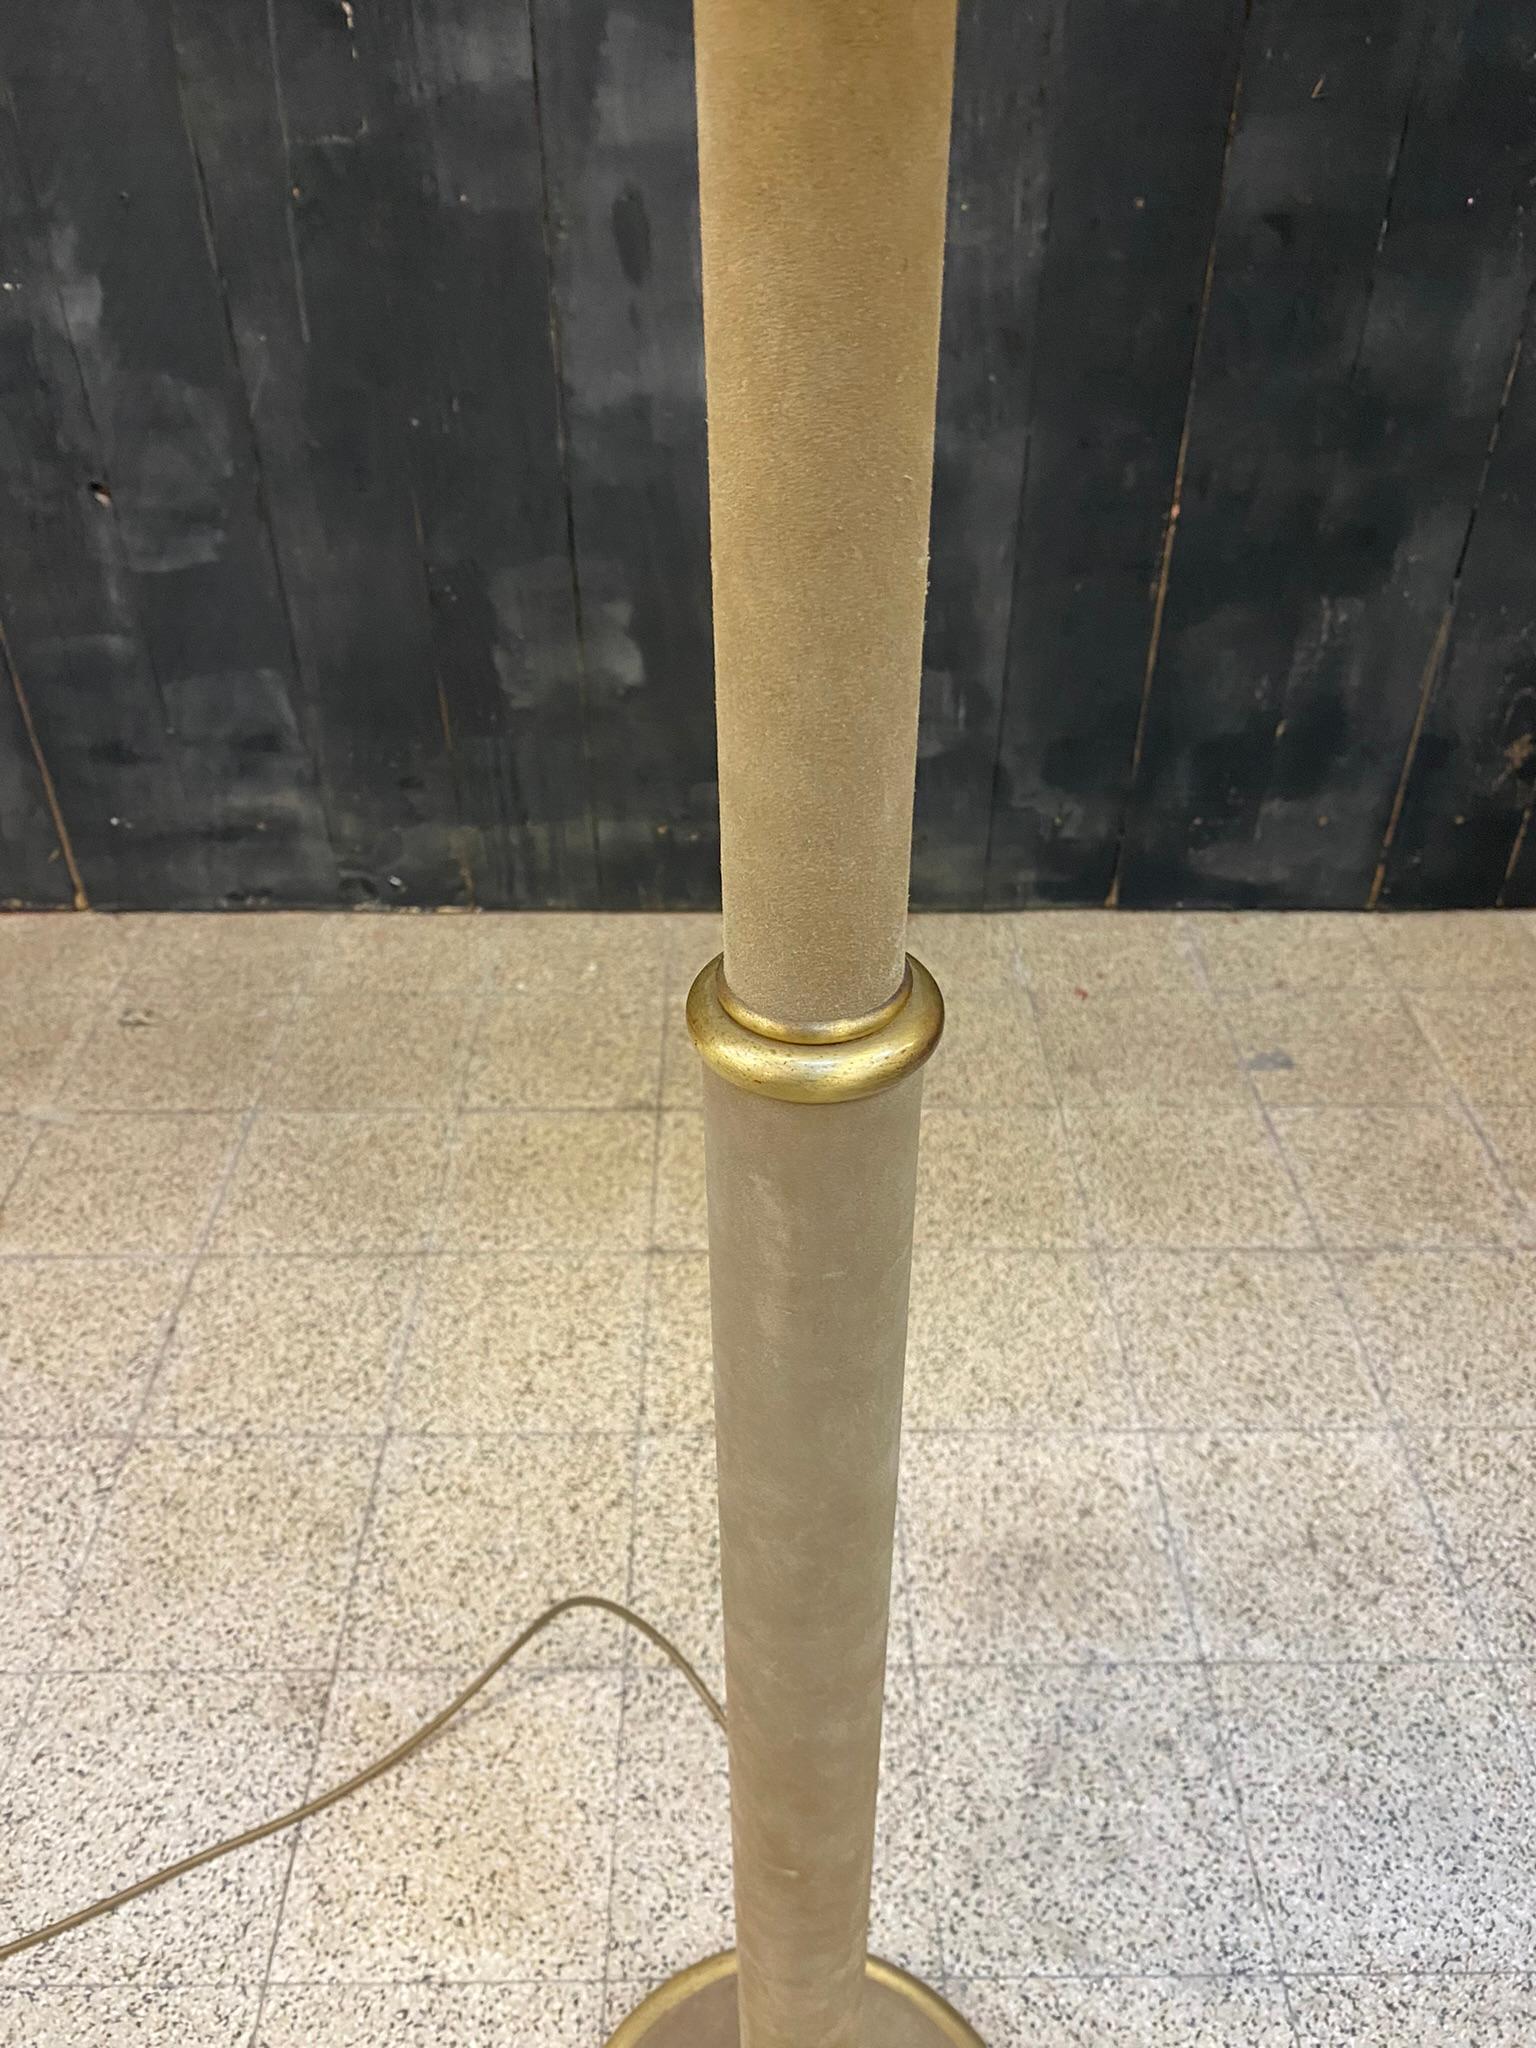 Elegant Floor Lamp in Suede Leather in the Style of Jacques Adnet, circa 1960 In Good Condition For Sale In Saint-Ouen, FR